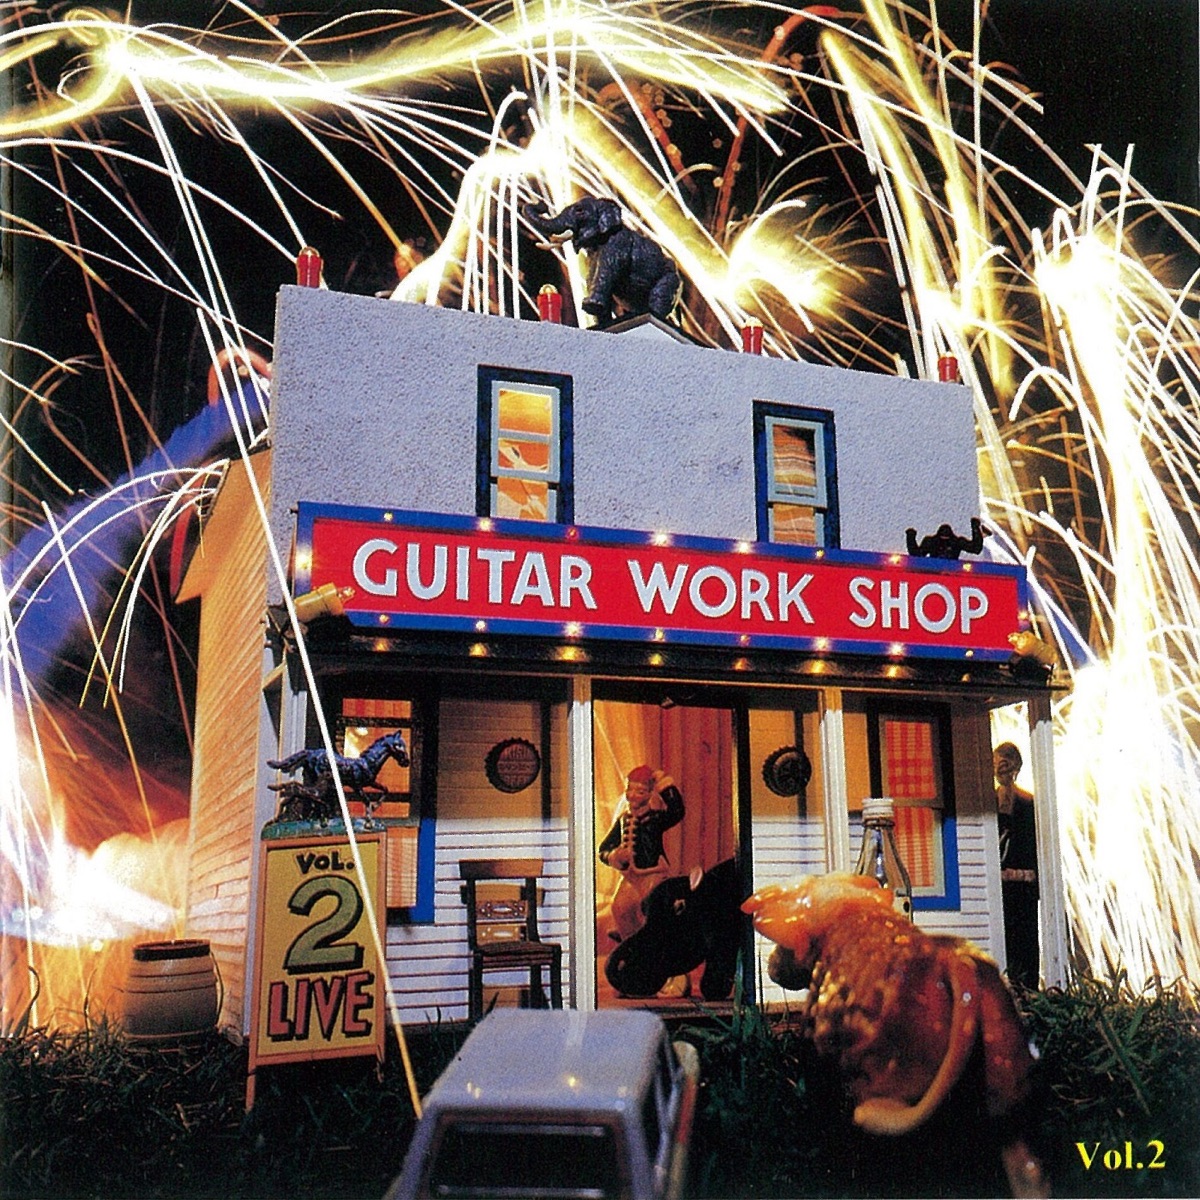 Guitar Workshop Vol.2 Live by Various Artists on Apple Music